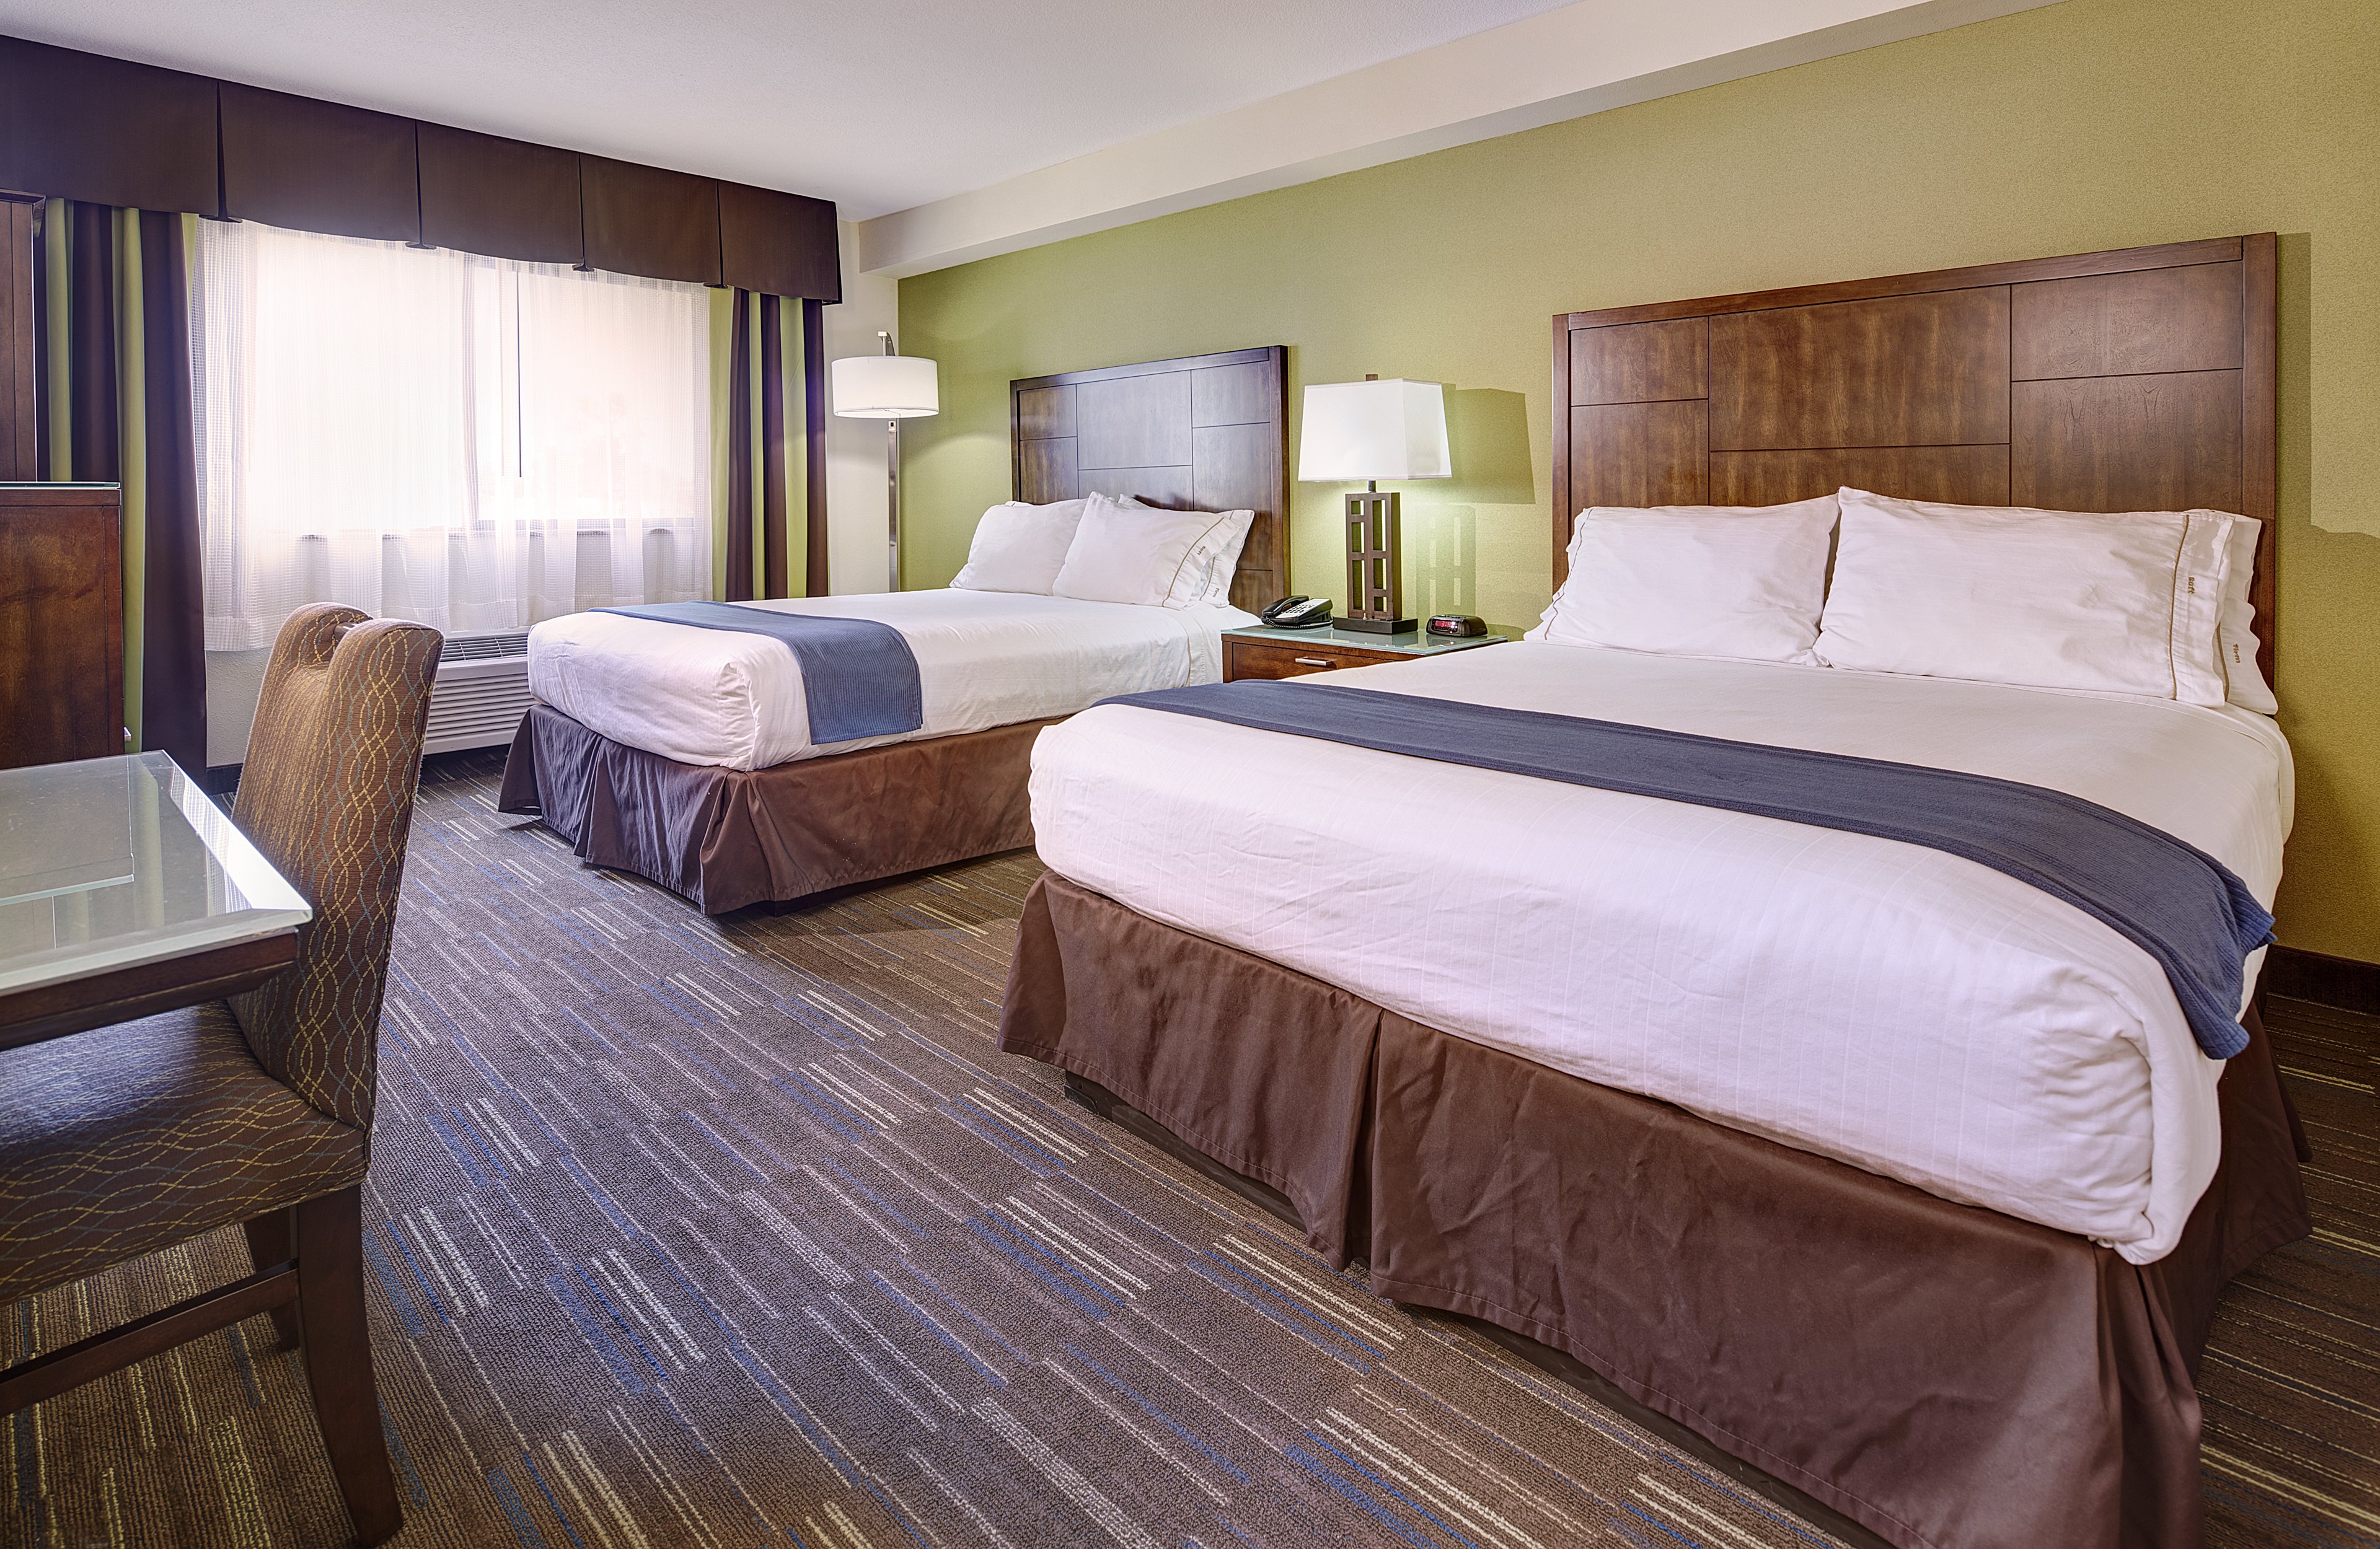 2 Queen Bed Room is perfect for families and business travelers.